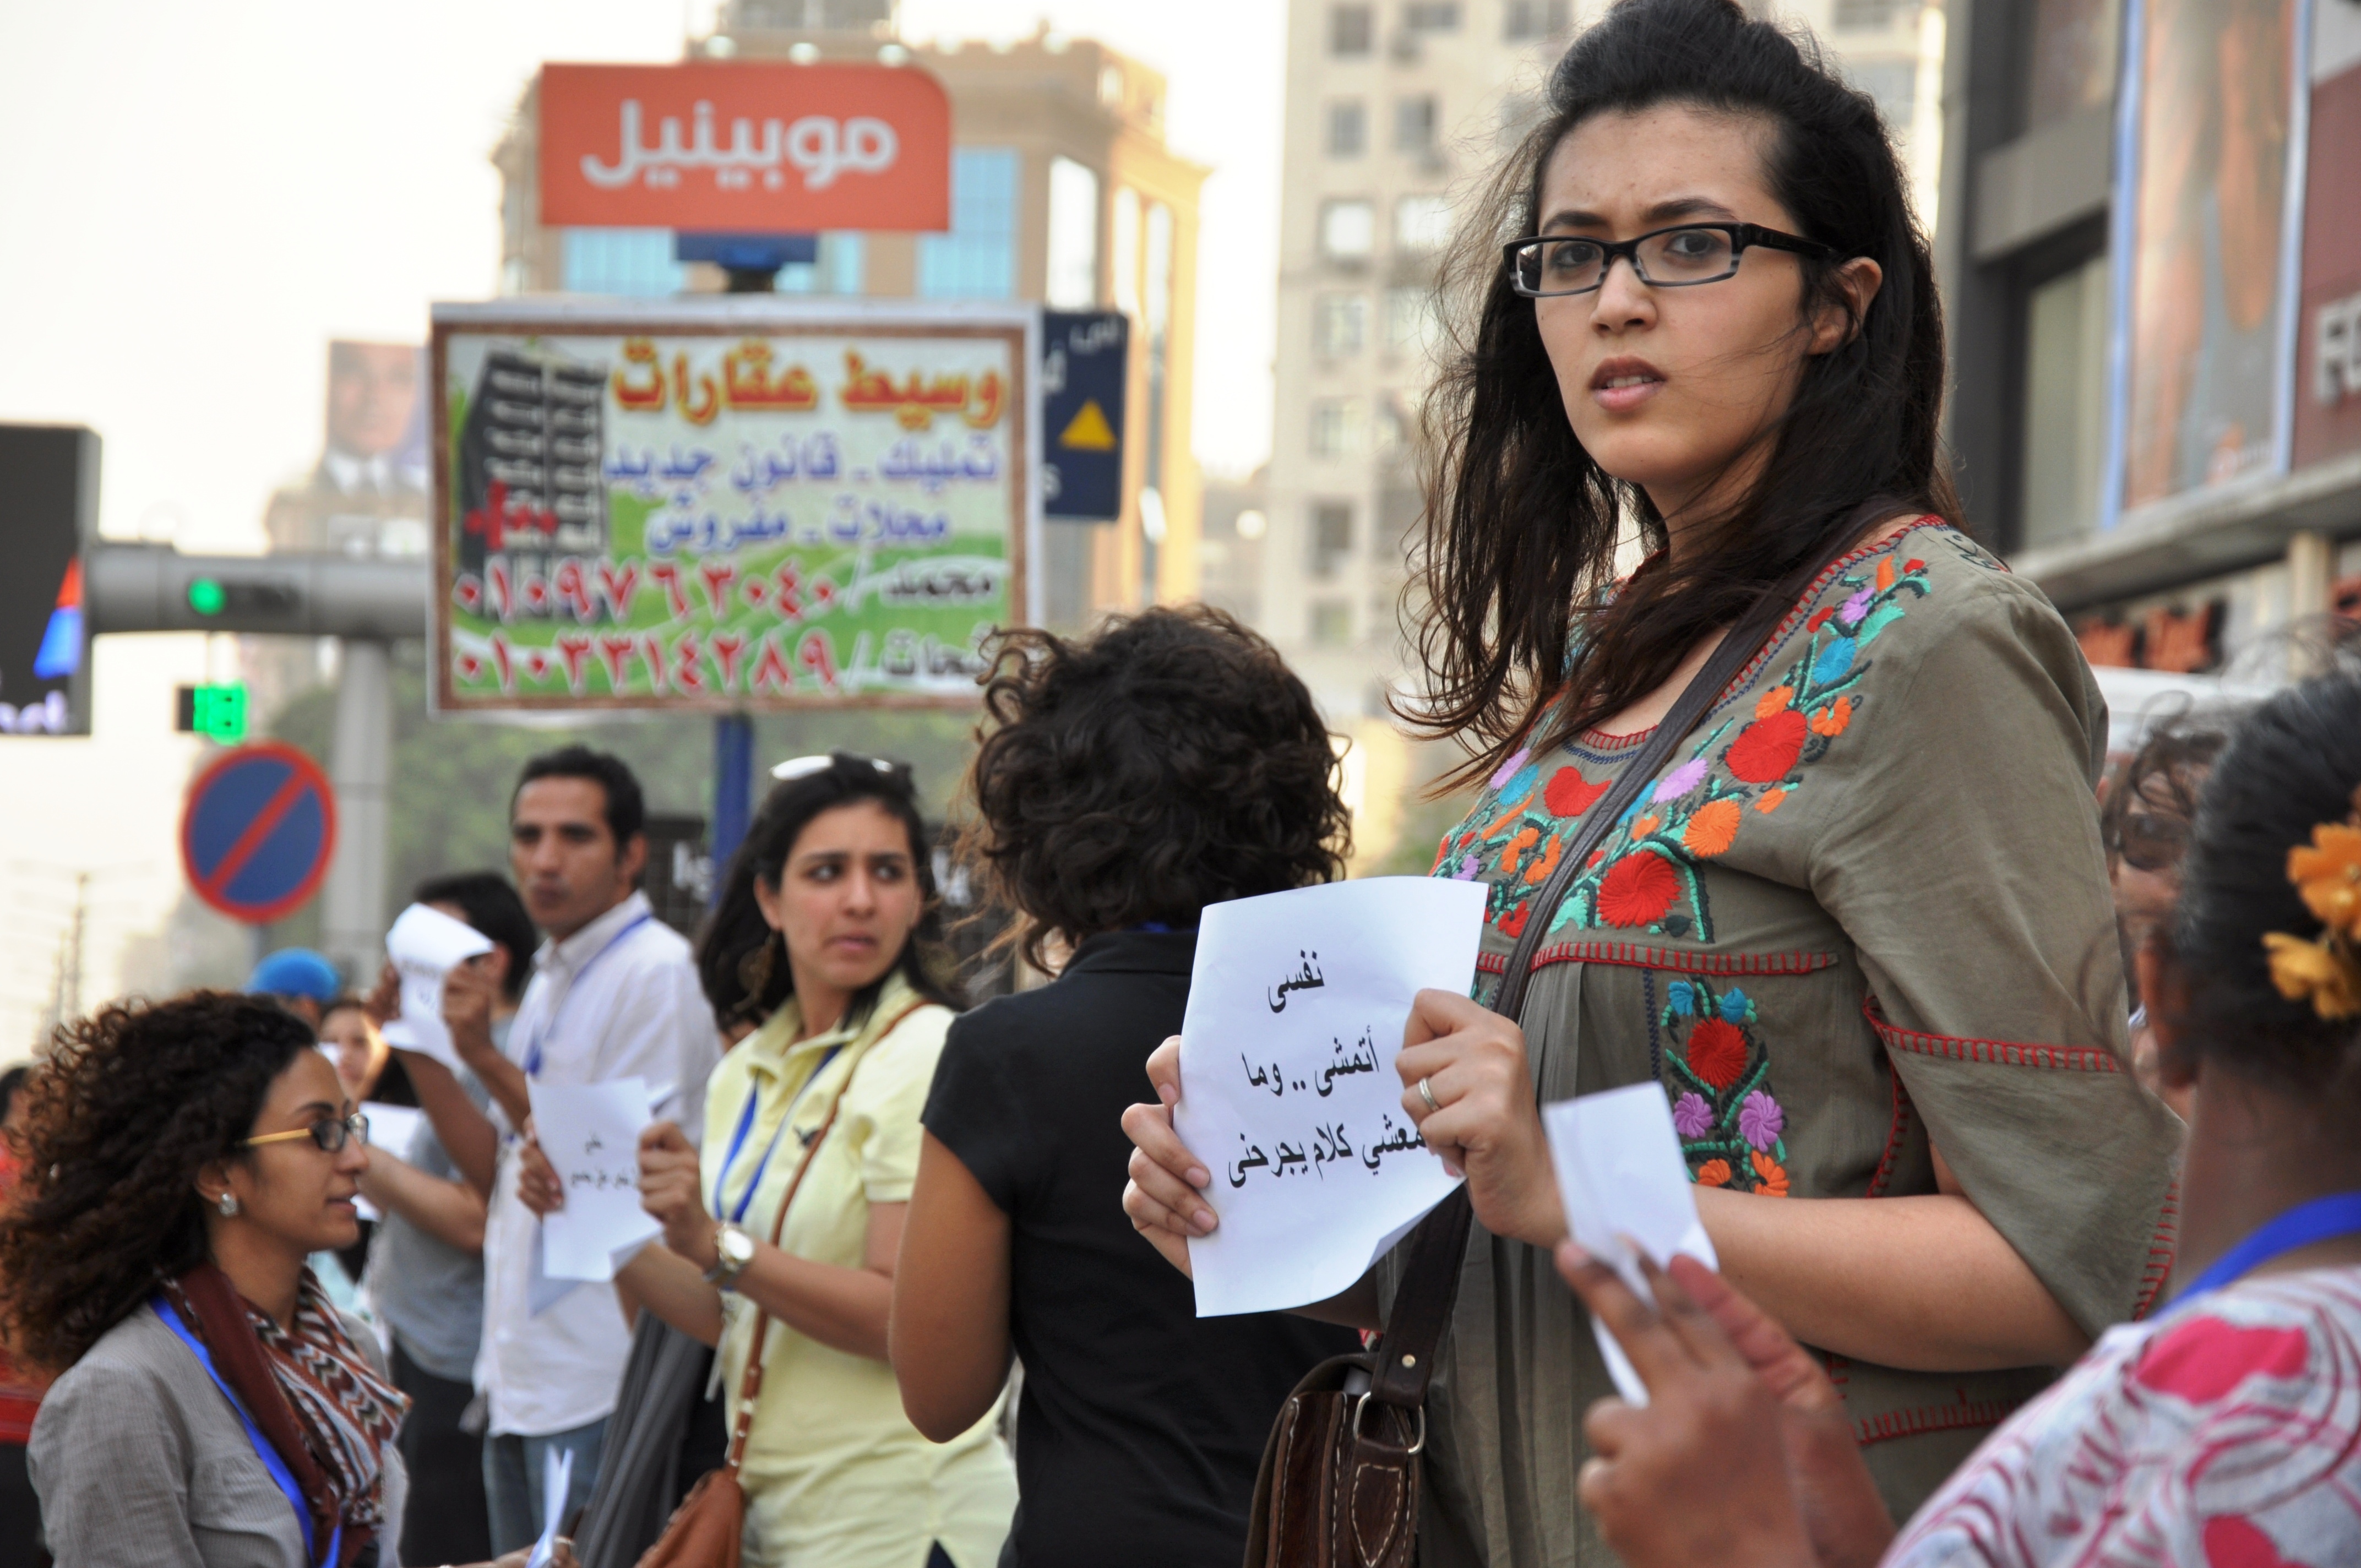 On a Wednesday in May 2012, inspired by snowballing social media discussions on sexual harassment in Egypt, a group of independent activists took the conversation to an offline public. They aimed to build support in Cairo and beyond, using the most simple of approaches: the countryÕs first Ôhuman chainÕ against sexual harassment. Photo Credit: UN Women/Fatma Elzahraa Yassin